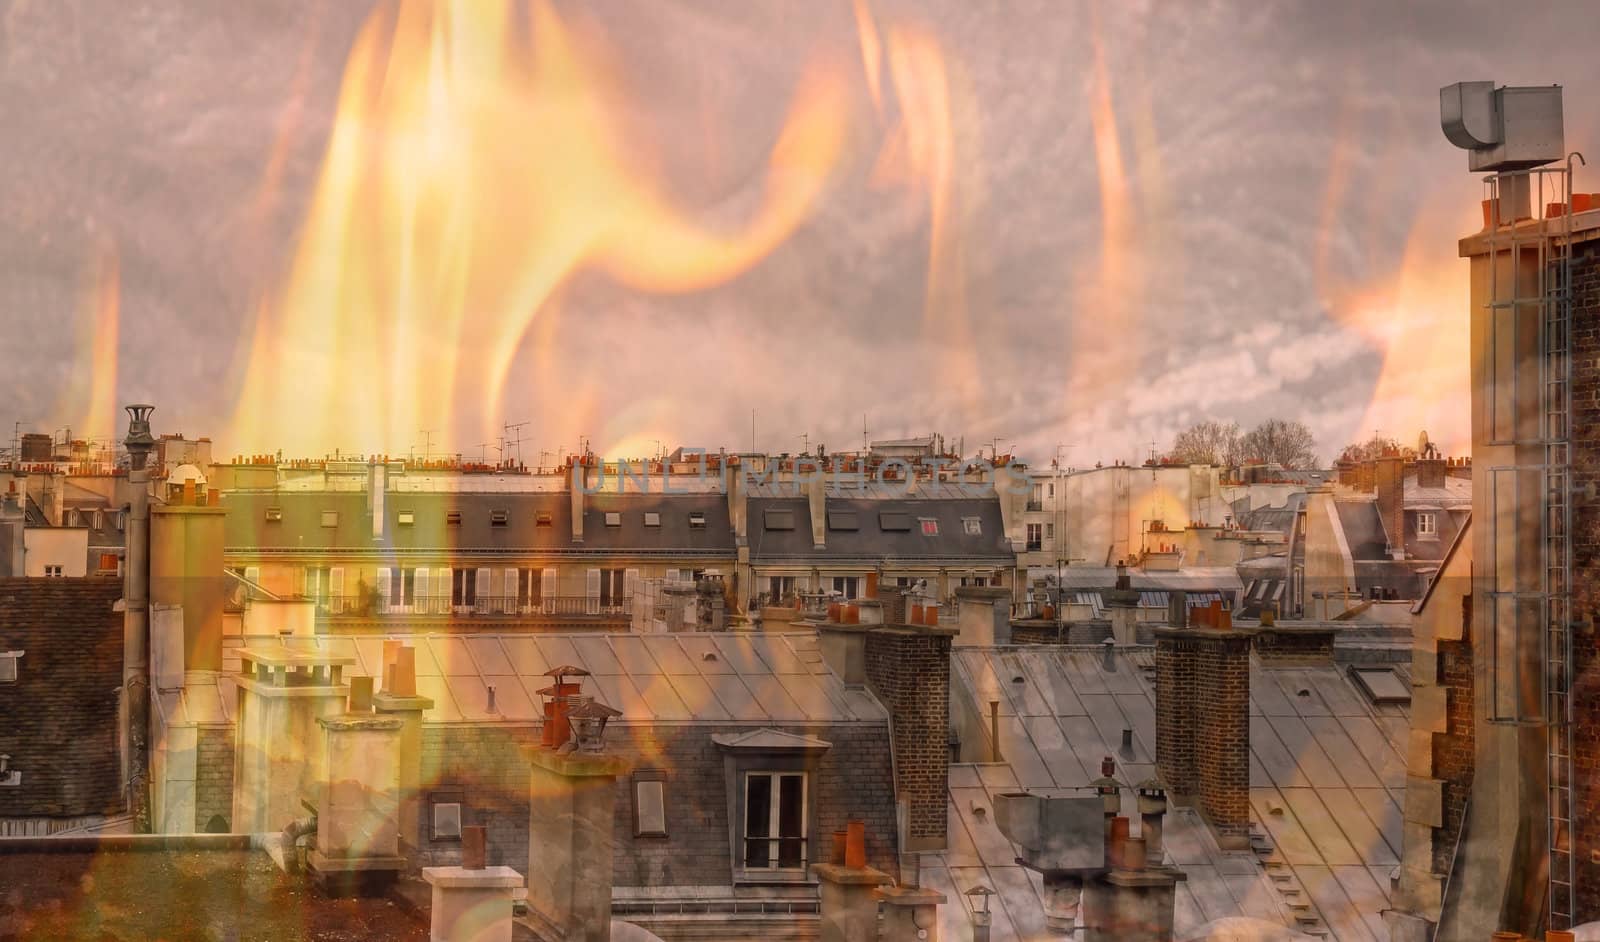 flames on the city, the vision of end of the world